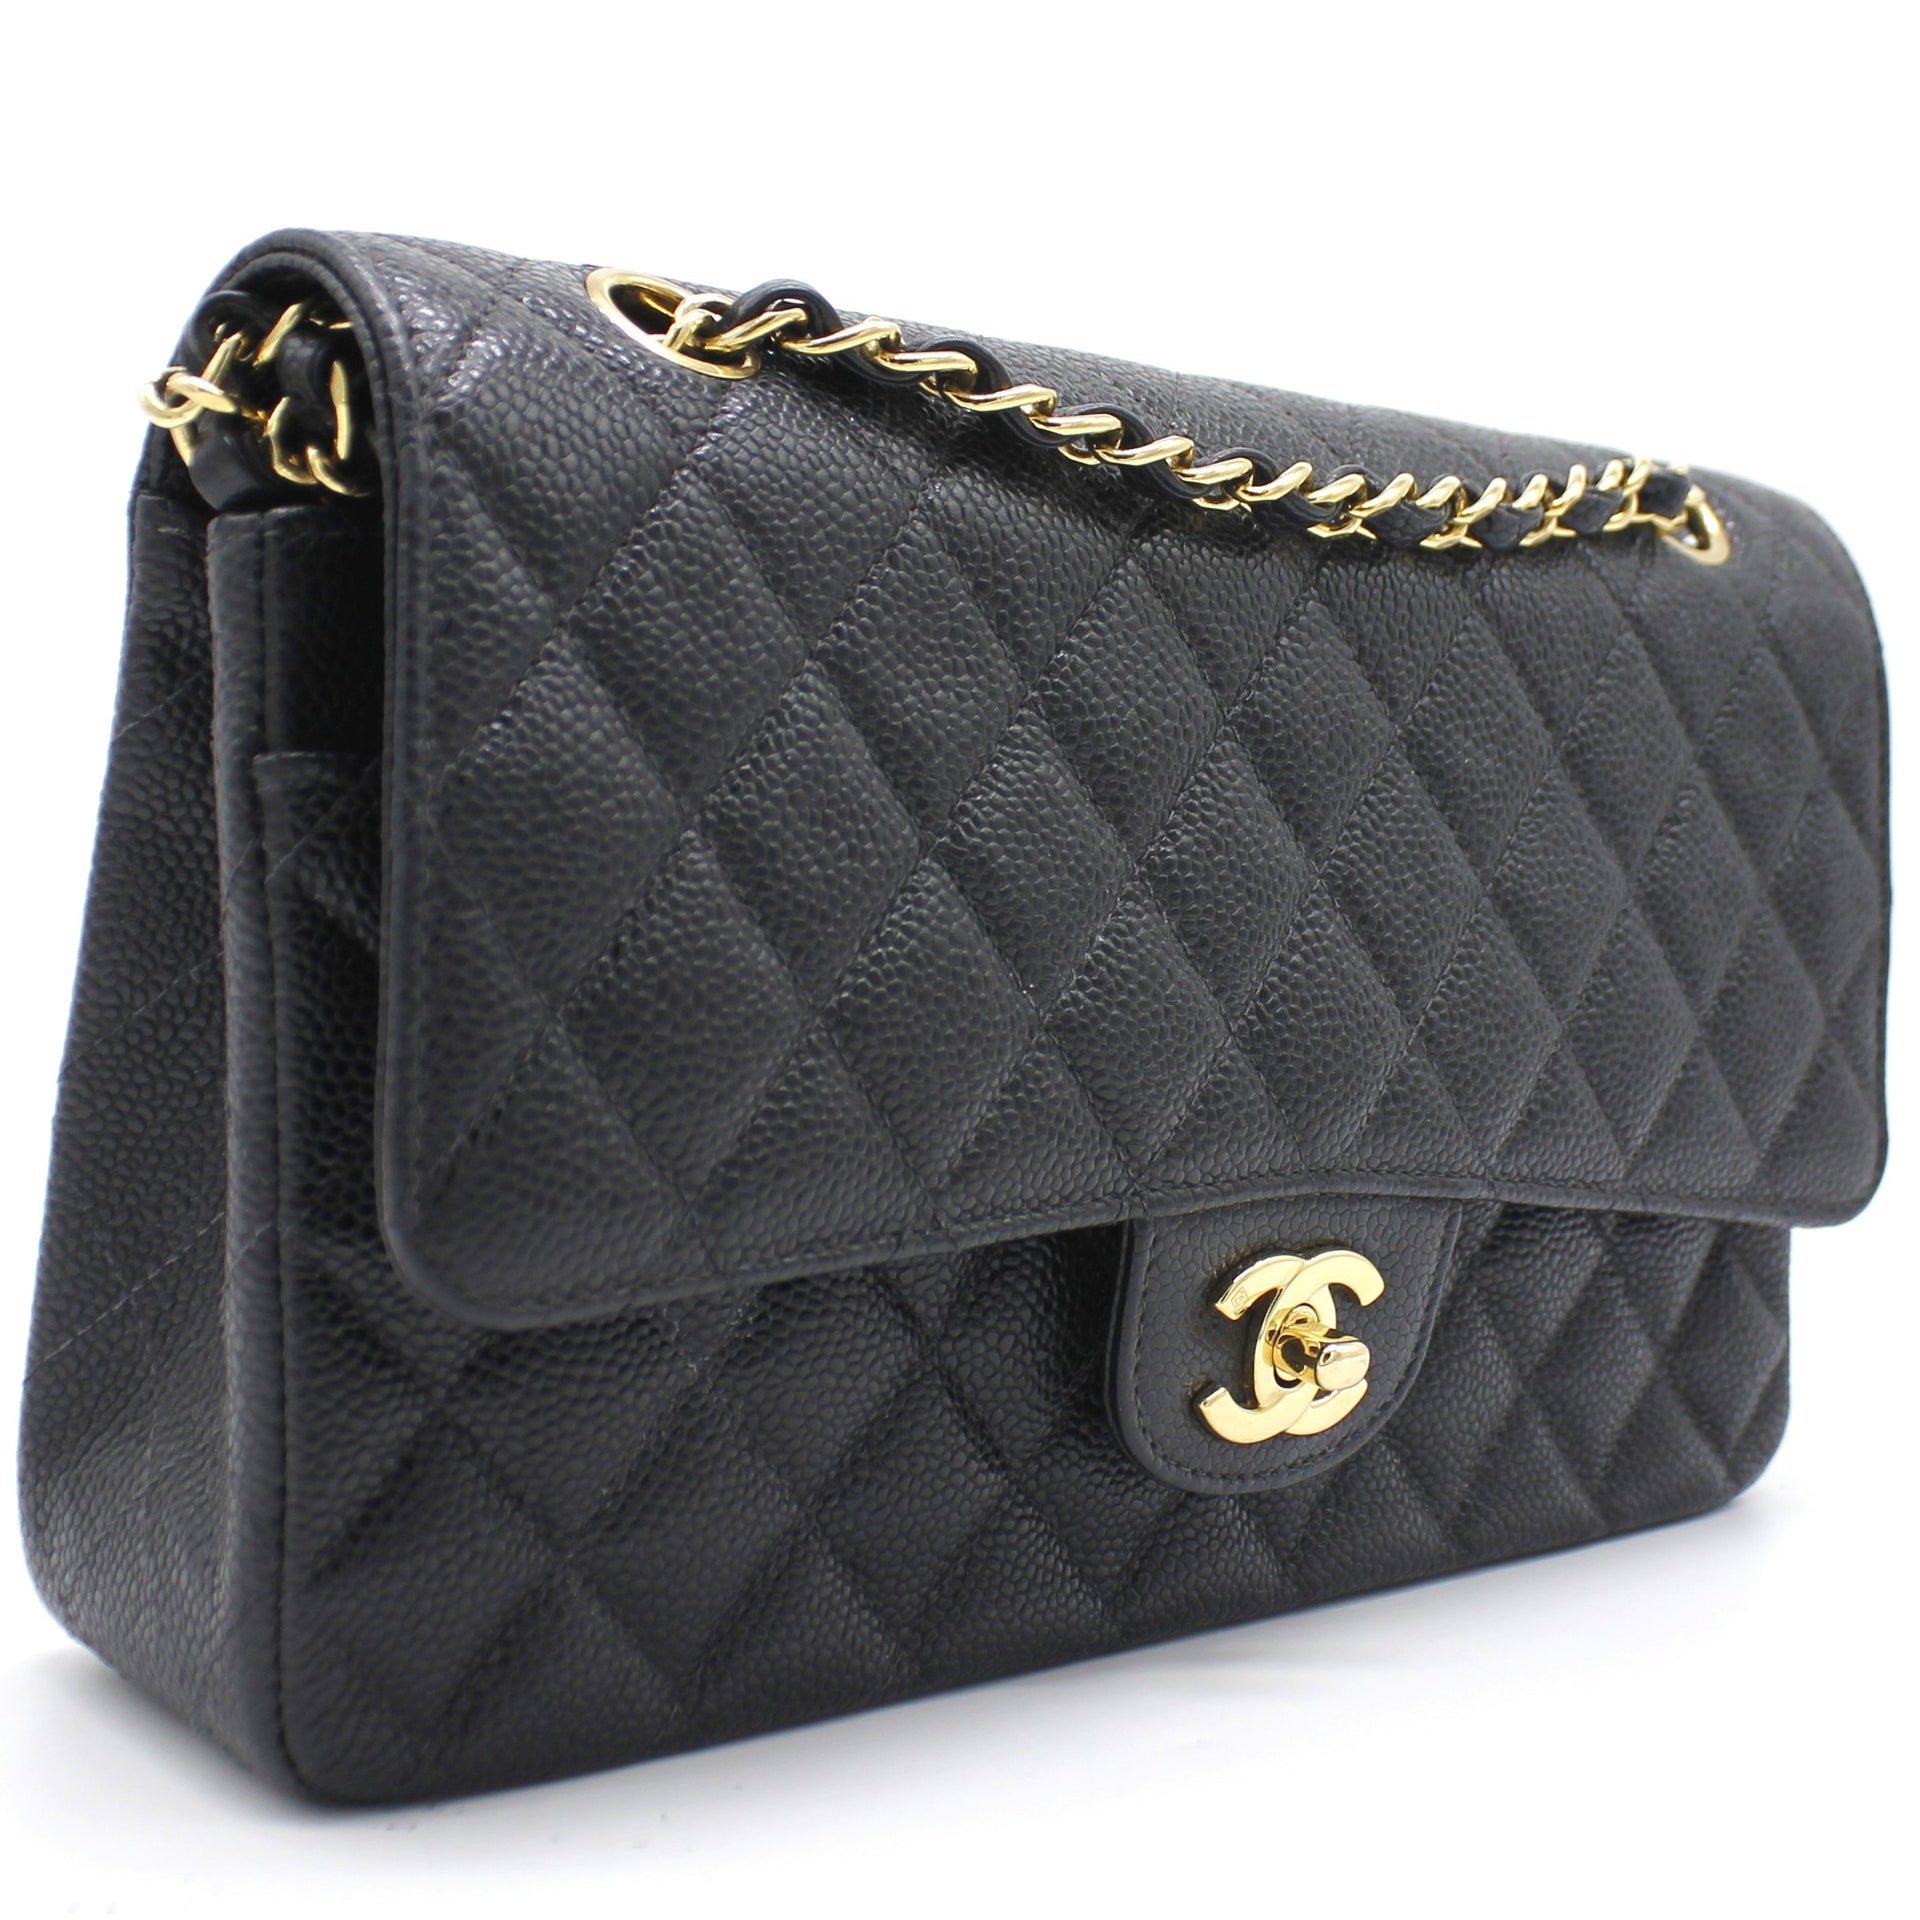 Chanel Vintage Classic Flap Review  Fashionphile Shopping Experience   Mademoiselle  YouTube